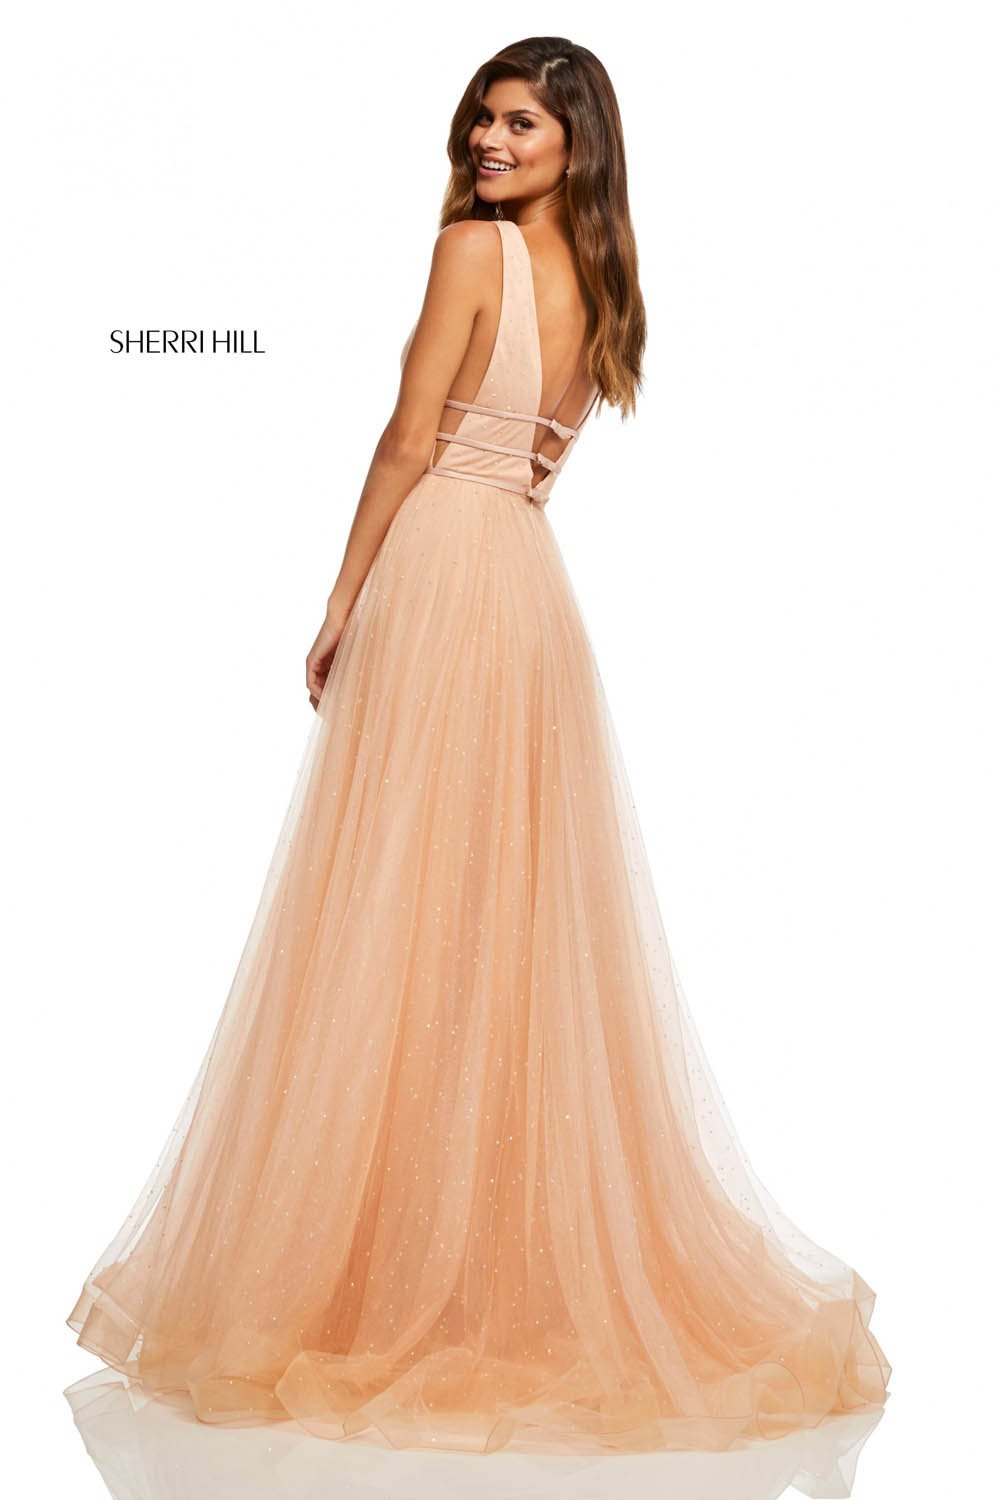 Sherri Hill 52737 dress images in these colors: Nude, Mint Green, Lavender, Coral, Yellow.